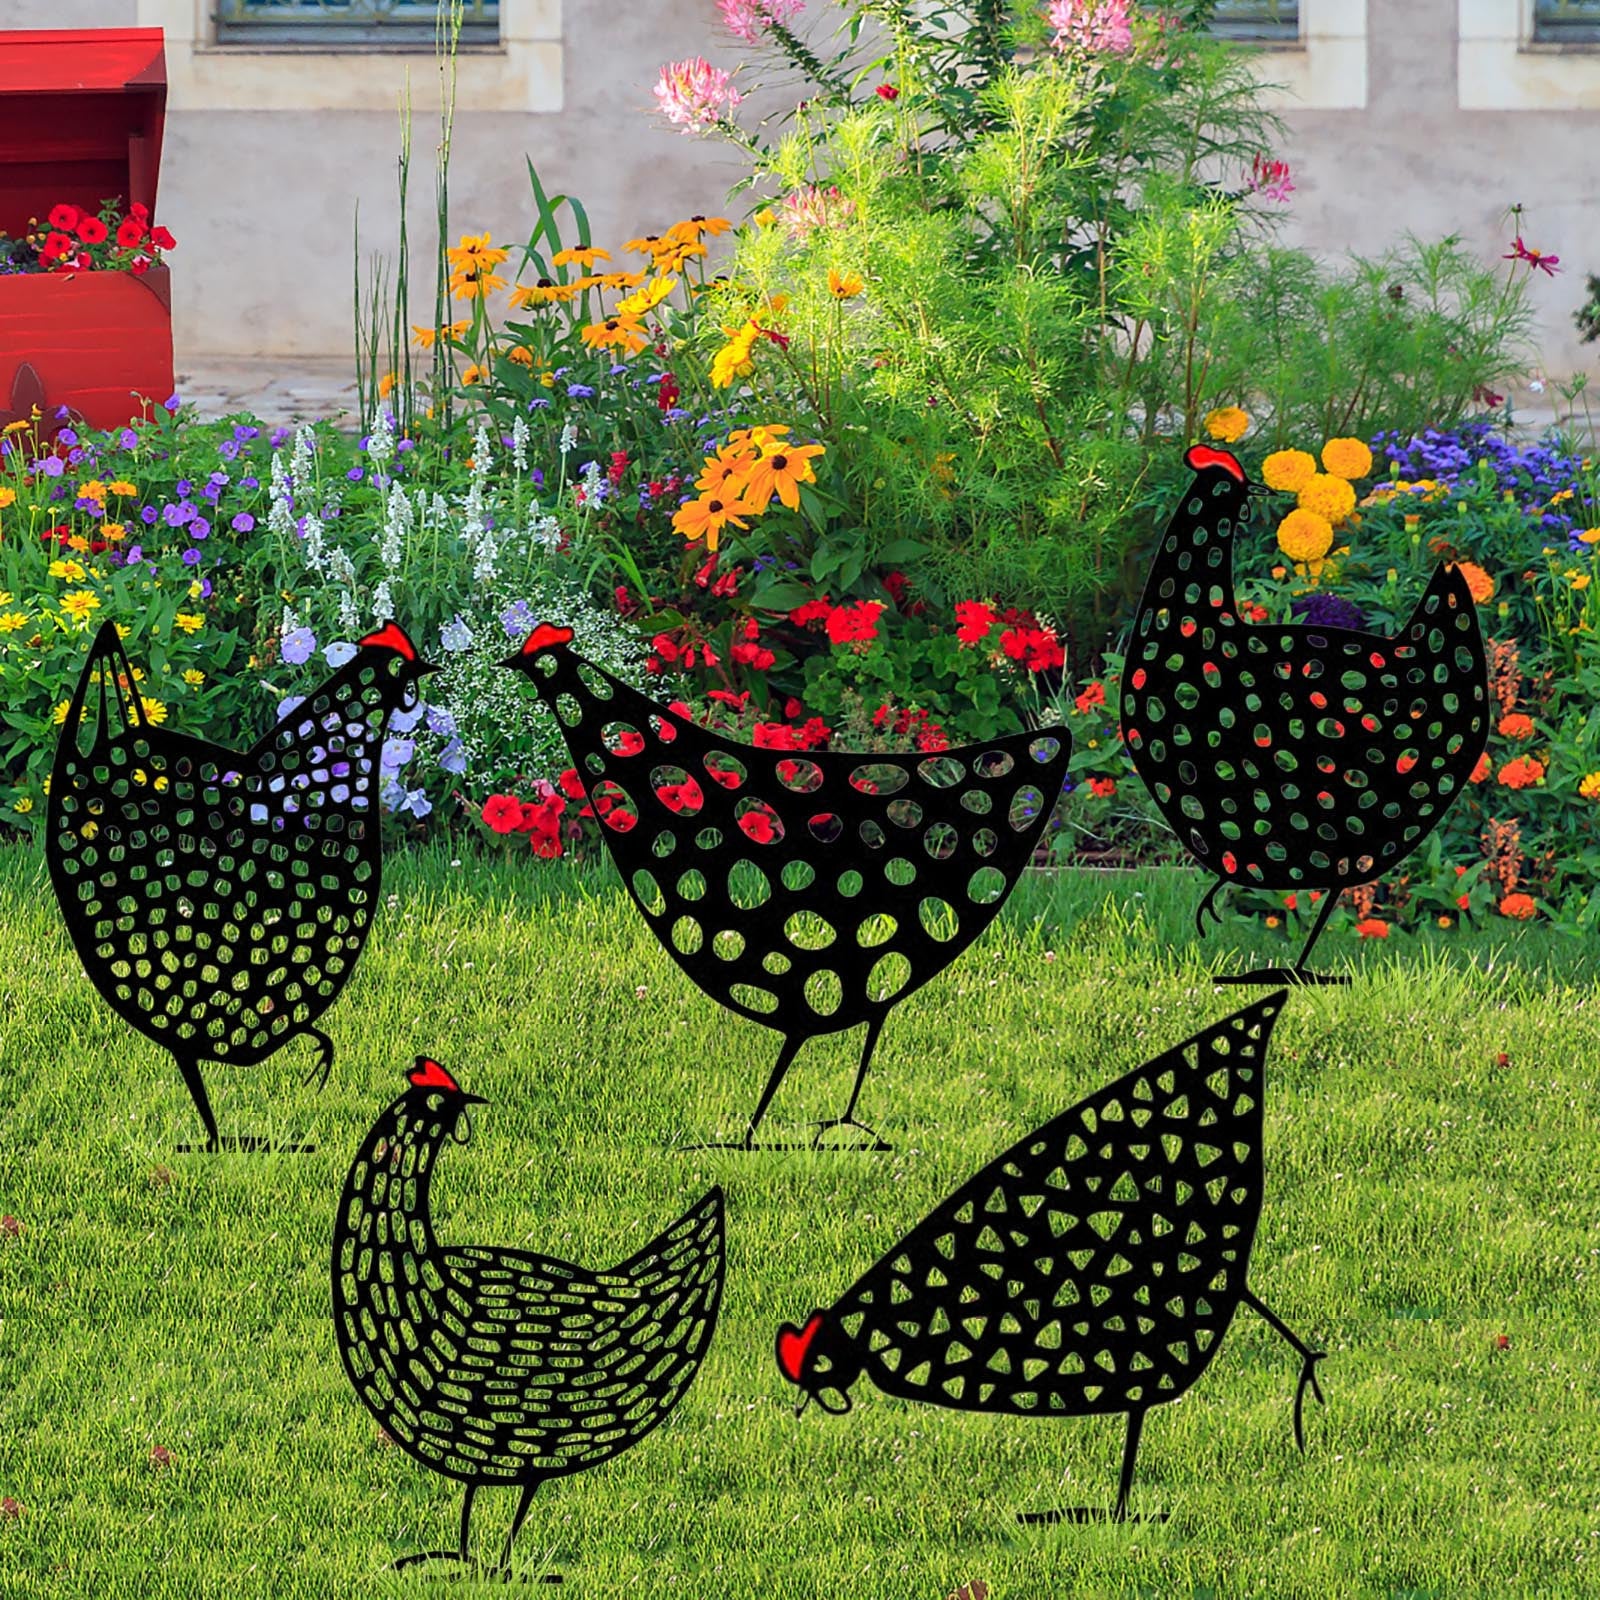 Rustic Roosters Garden Ensemble